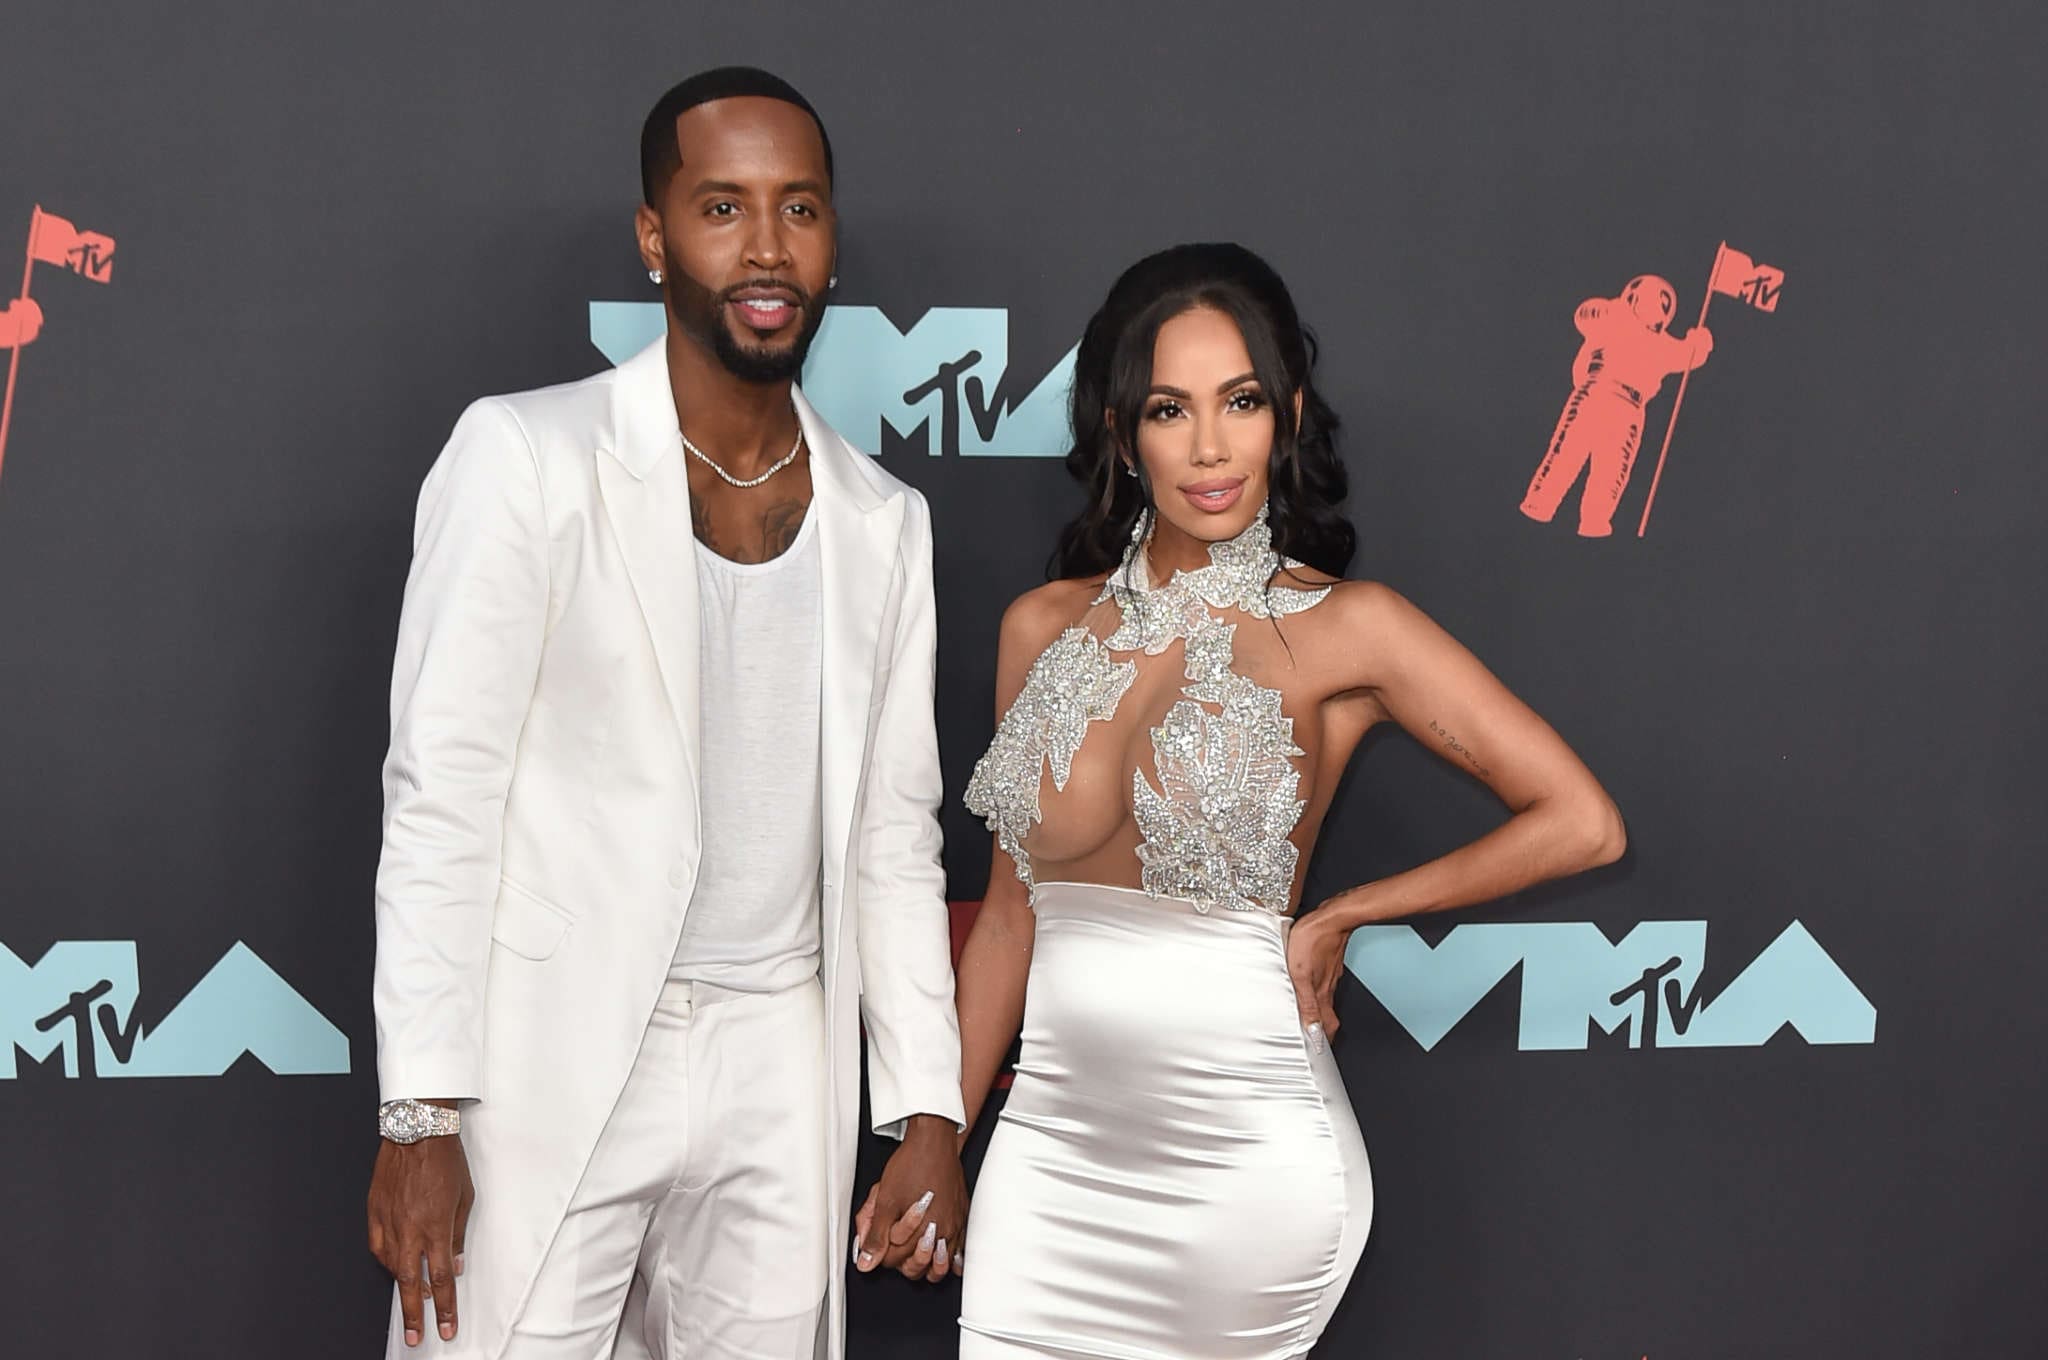 Erica Mena And Safaree Had Their One Year Anniversary - See The Videos And Pics From The Event